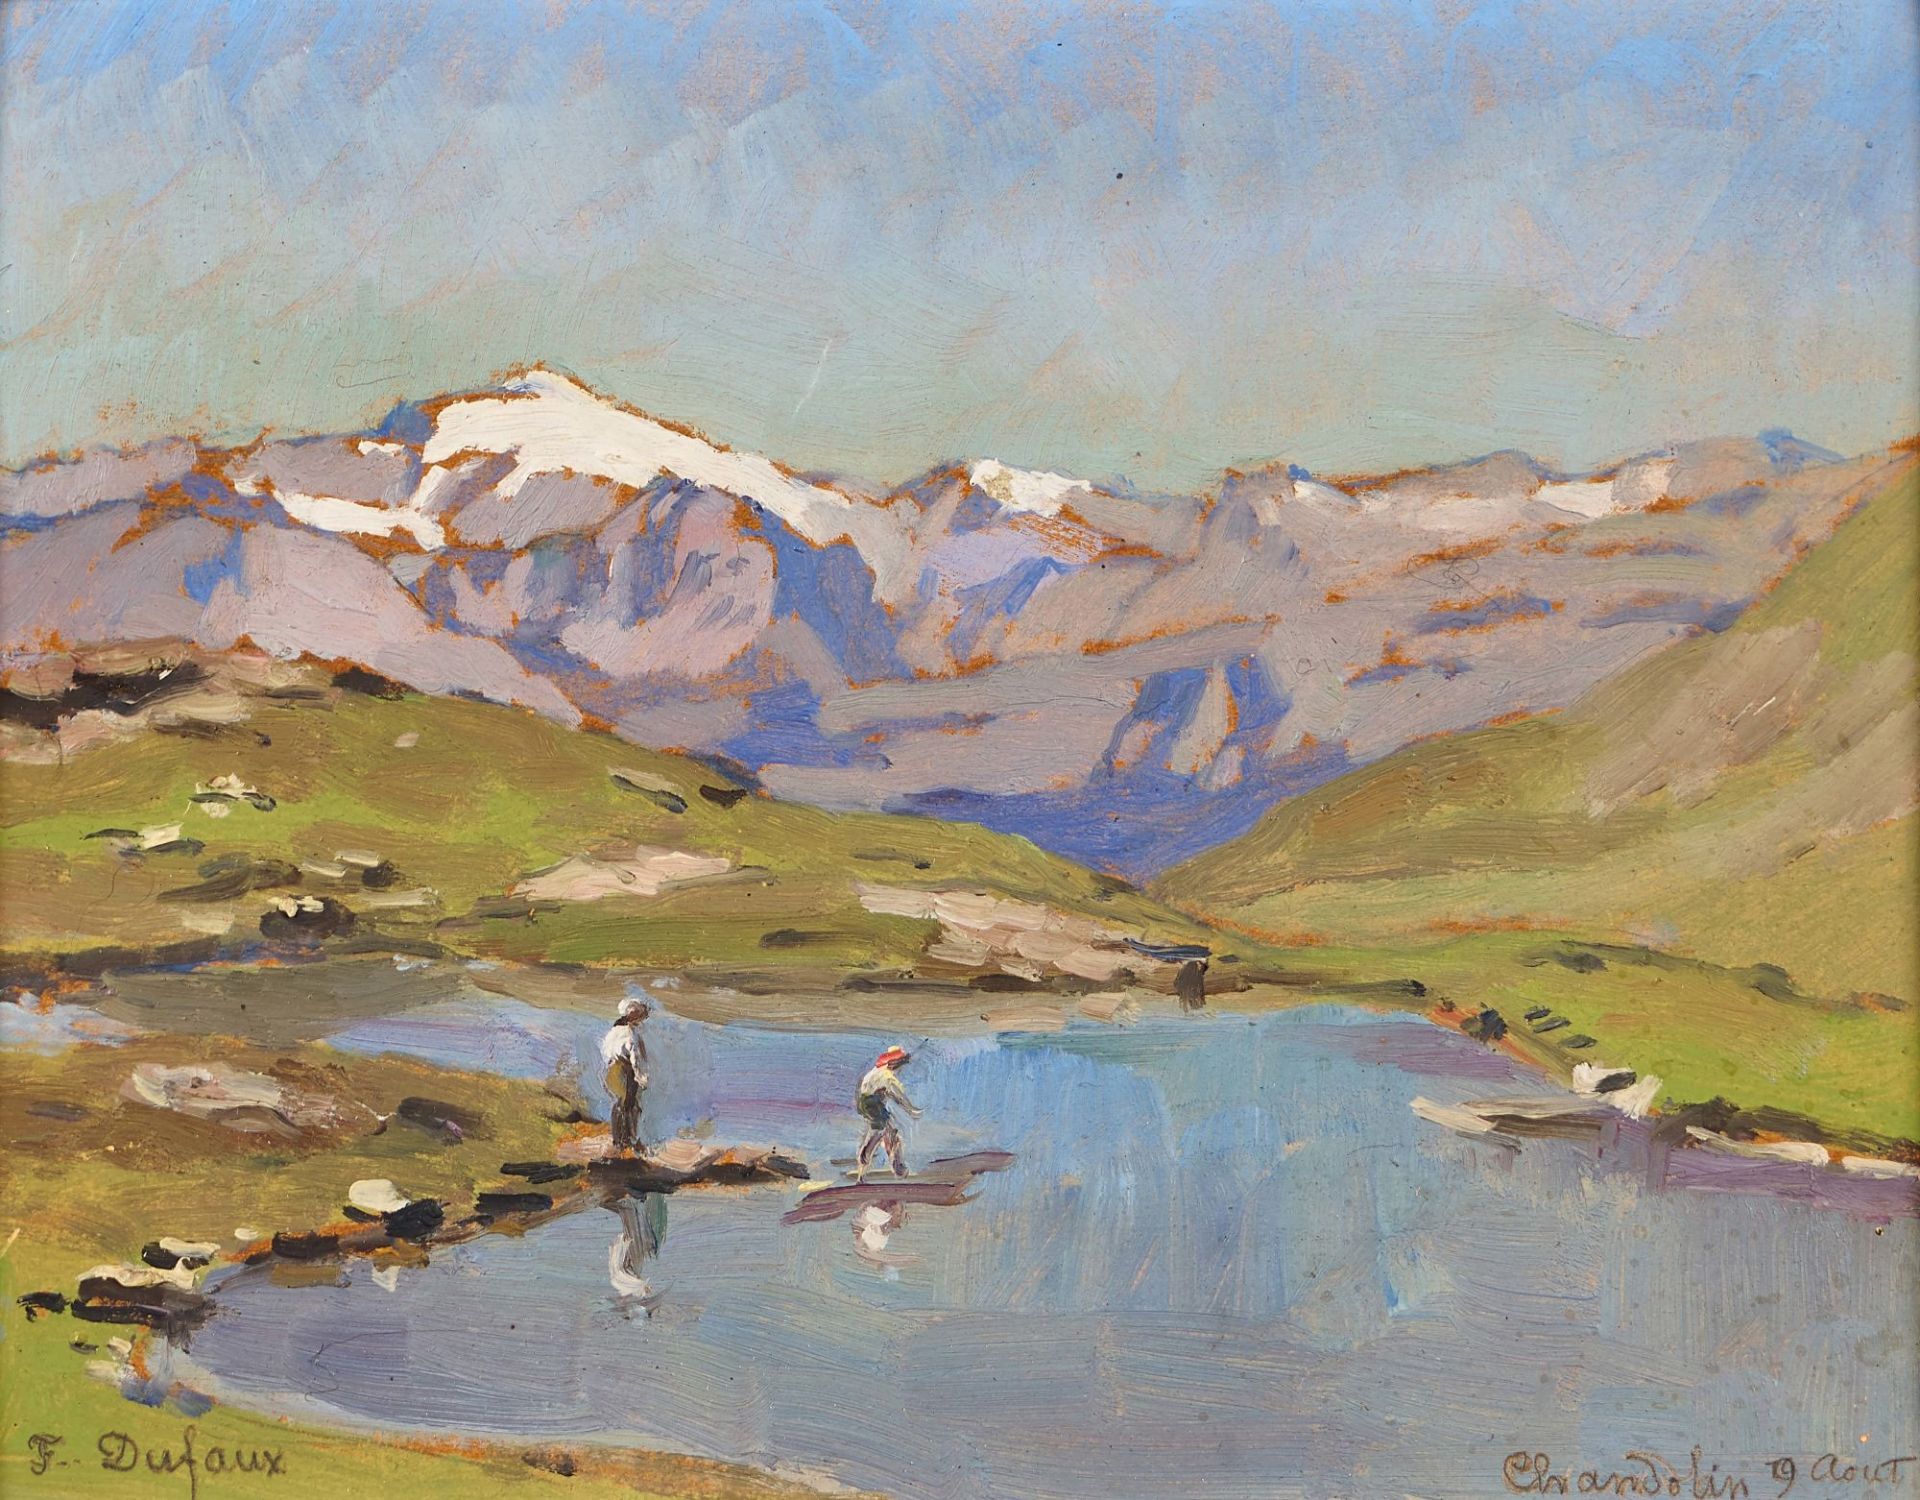 DUFAUX, AUGUSTE FRÉDÉRIC: Bergsee bei Chandolin.